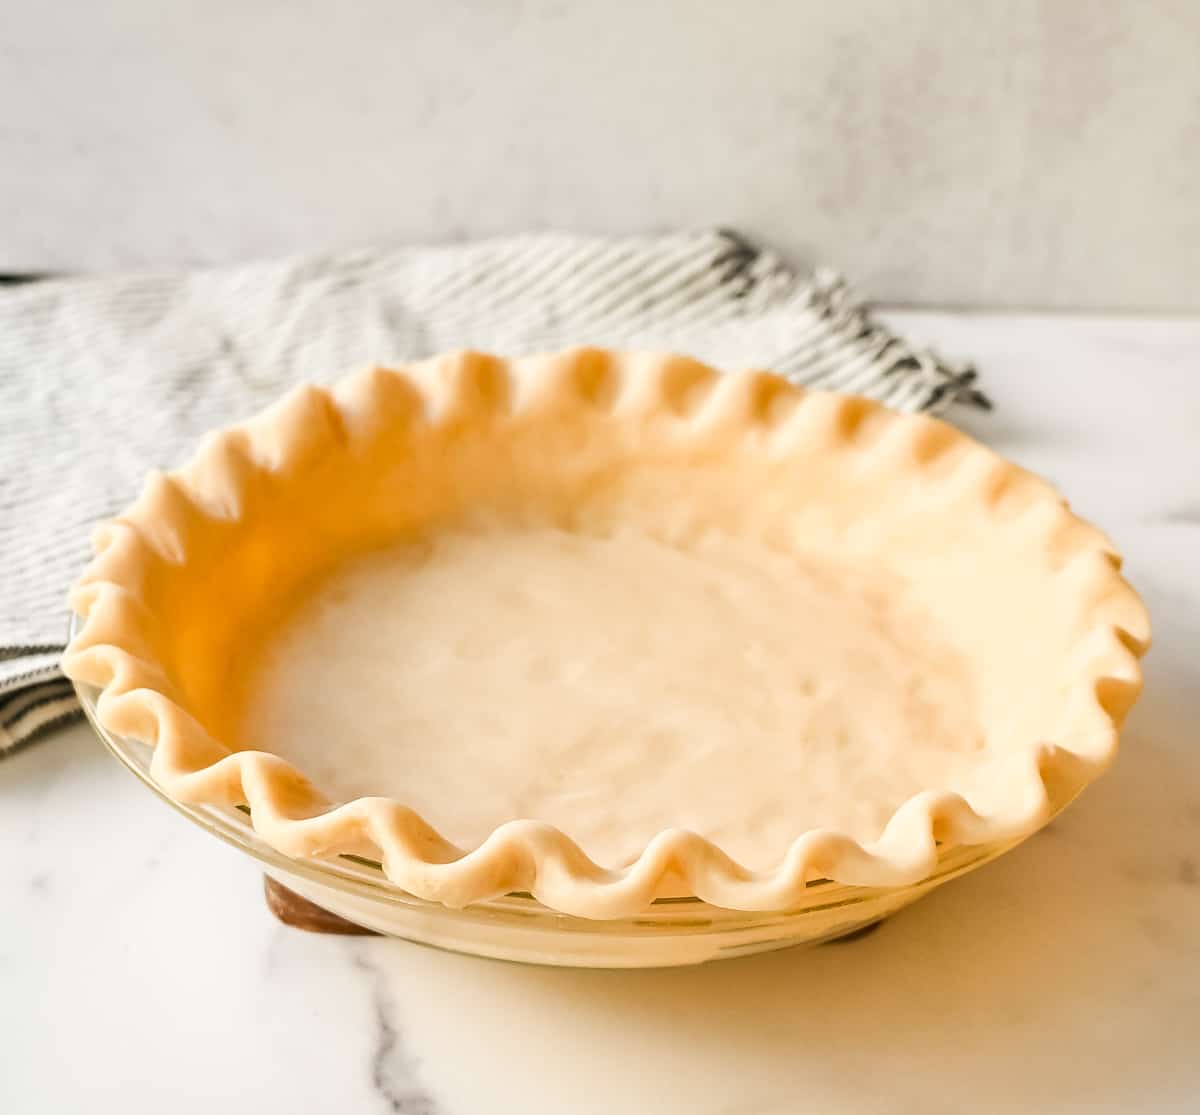 How to make all butter pie crust. Tips for making the best pie crust.